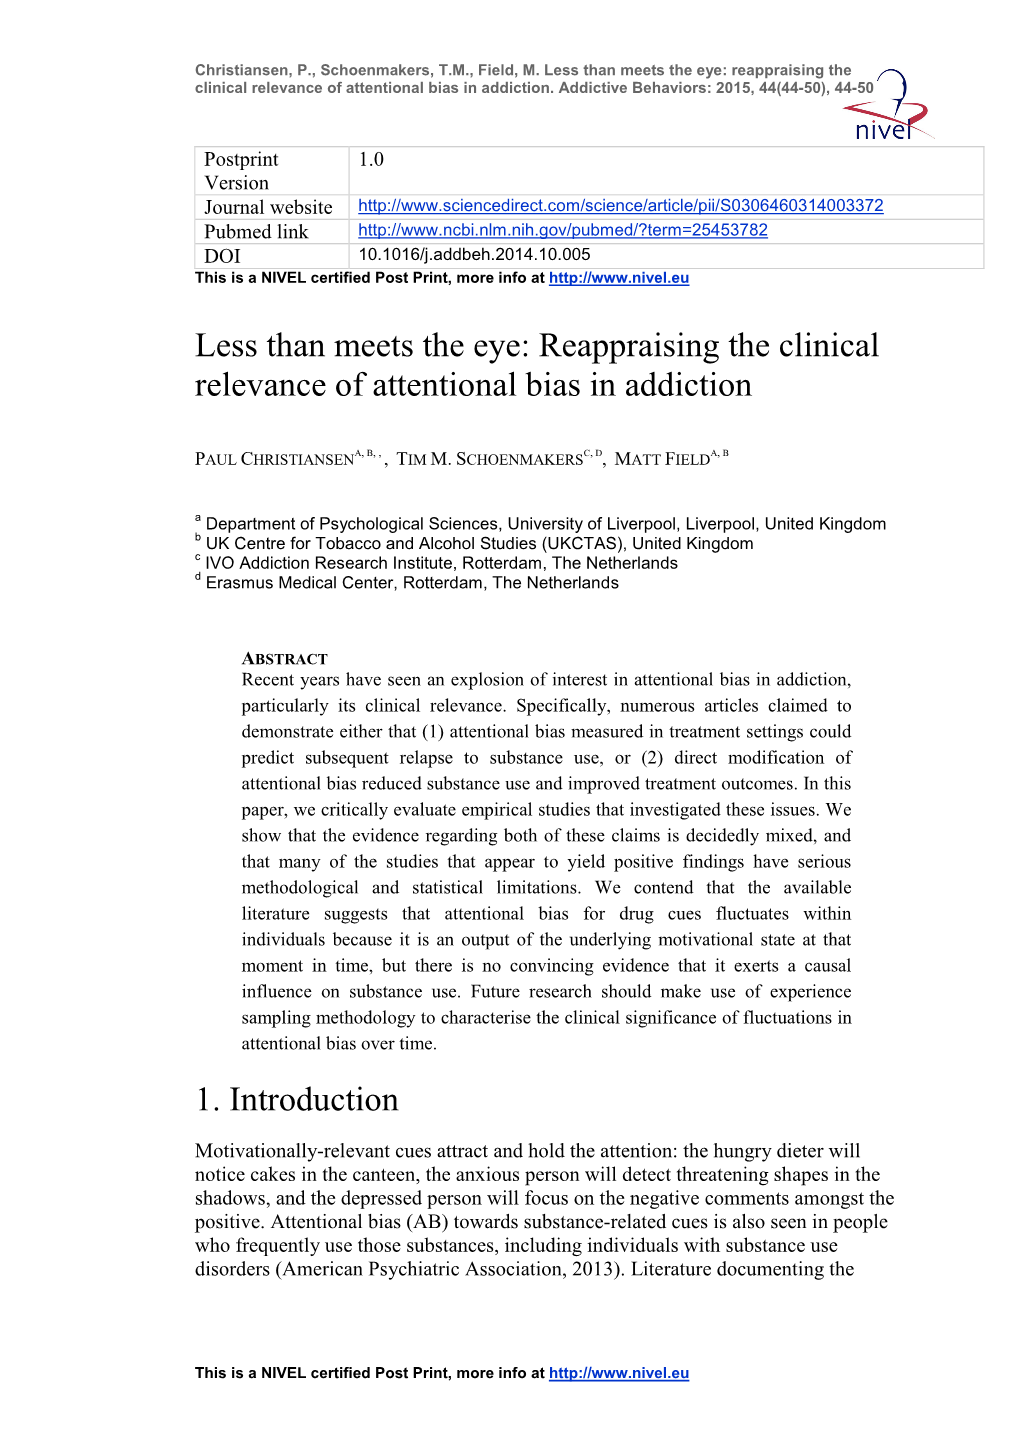 Reappraising the Clinical Relevance of Attentional Bias in Addiction. Addictive Behaviors: 2015, 44(44-50), 44-50